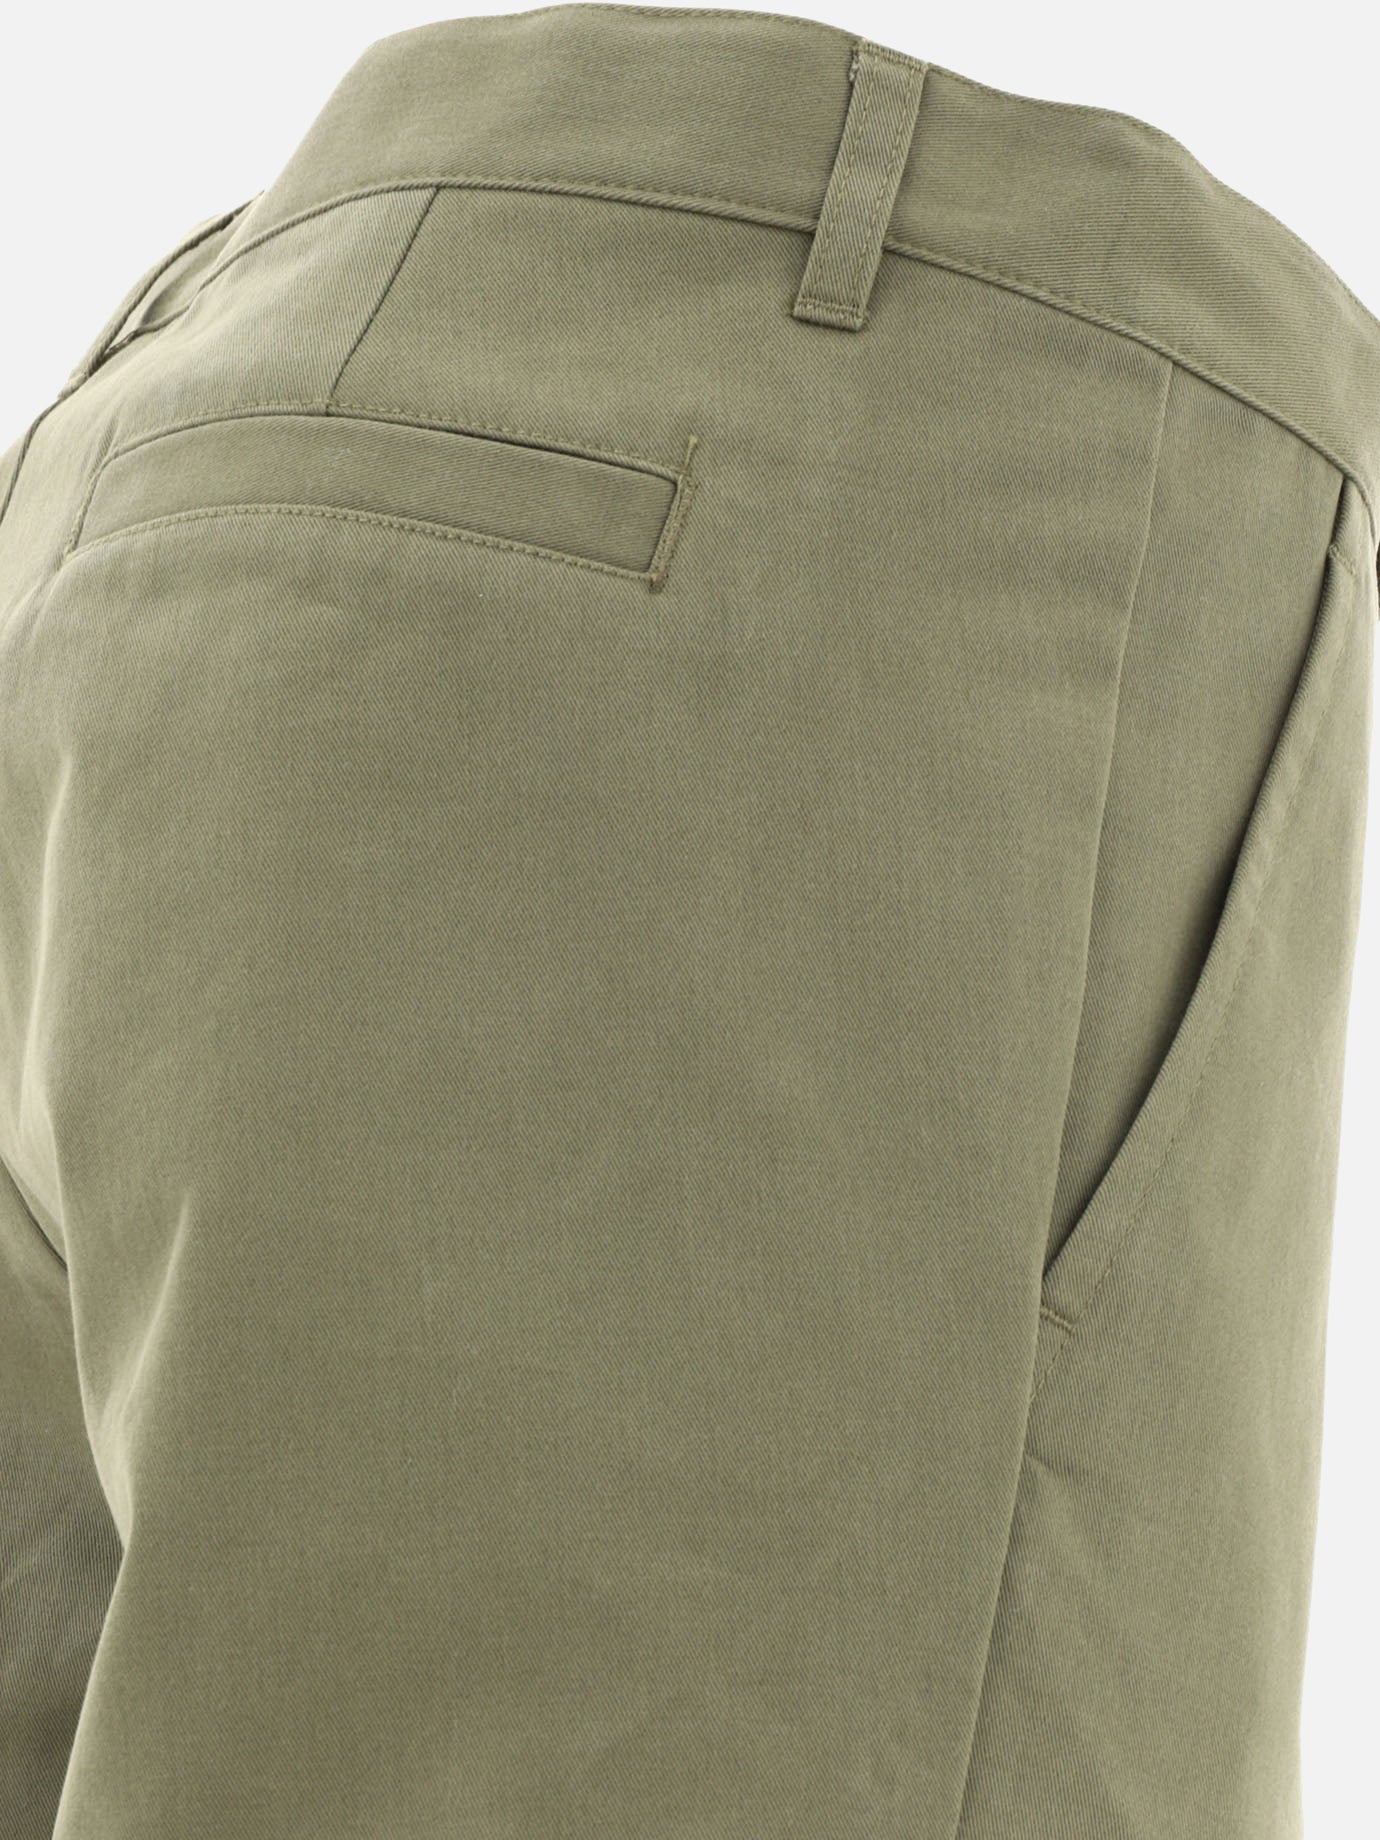 "Chino Ville" trousers